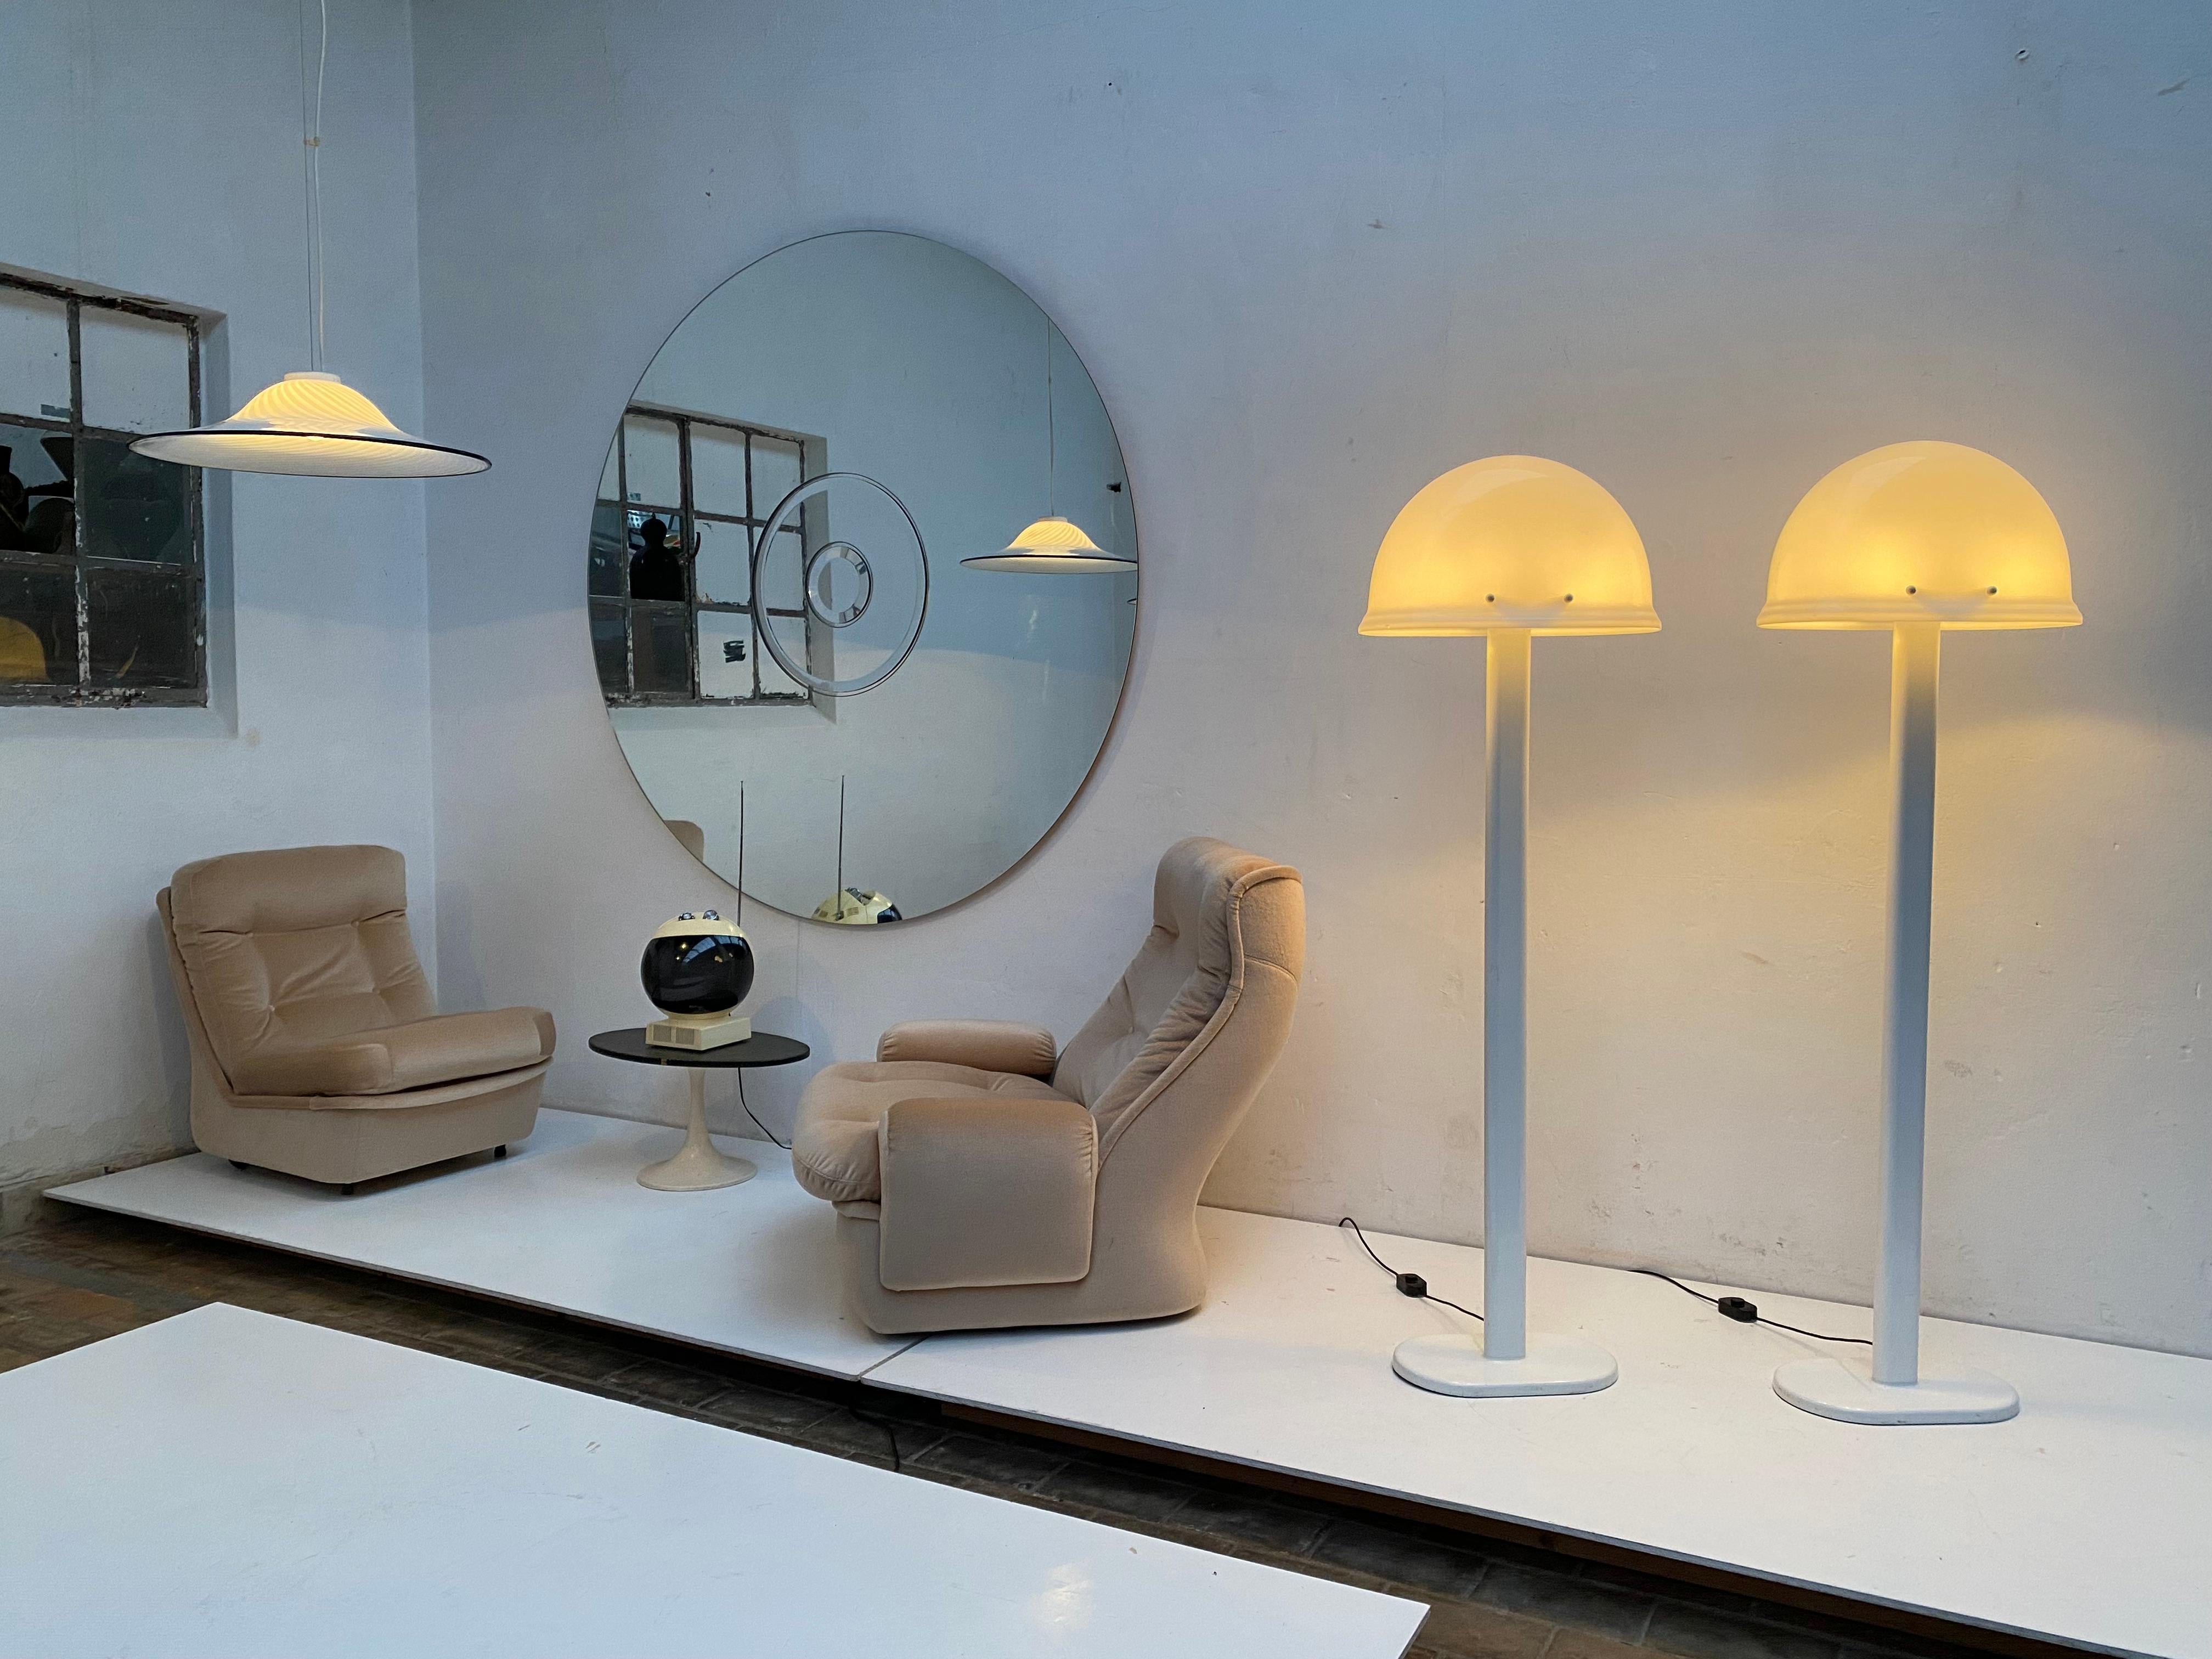 Pair of stunning floor lamps by Rodolfo Bonetto for iGuzzini  Italy 1970

The design is half way in the Italian Radical Design Movement (1965-1975) and has strong Space Age influences 

Top quality manufacturing Italian lighting, marked with